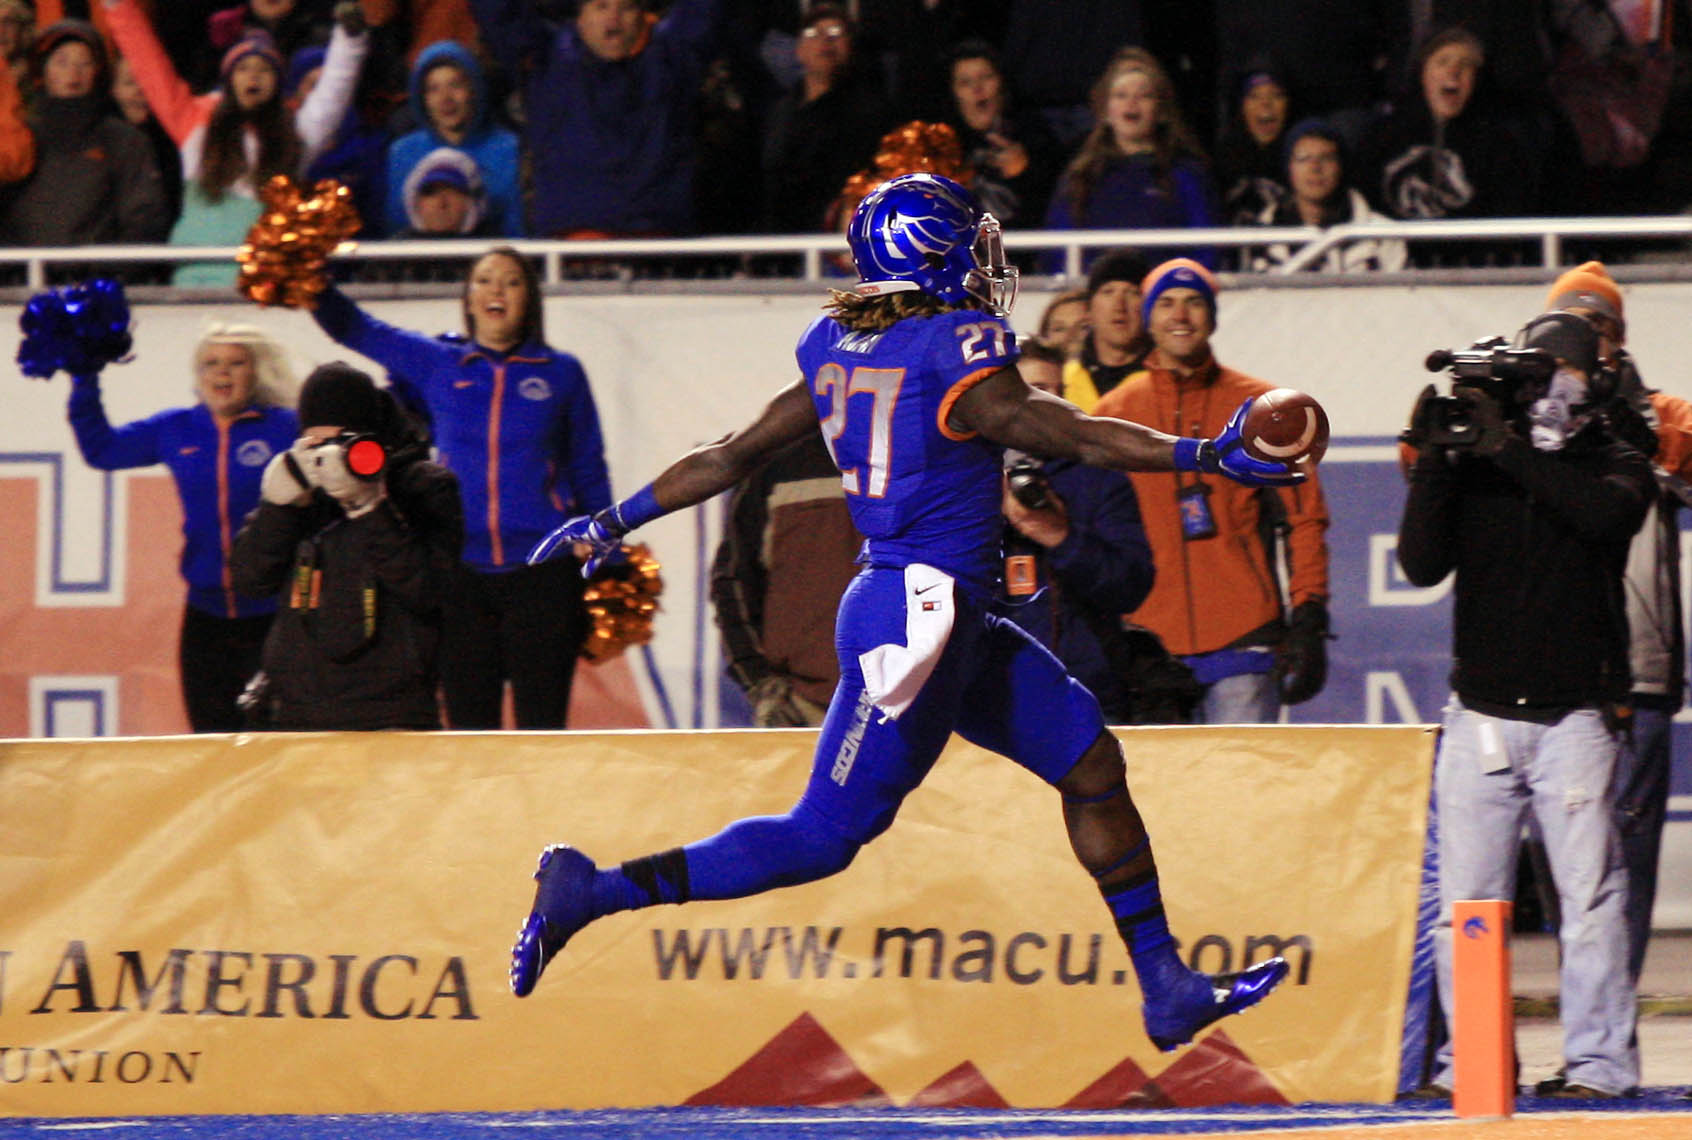 Nov 29, 2014; Boise, ID, USA; Boise State Broncos running back Jay Ajayi (27) scores his second touchdown of the first half against the Utah State Aggies at Albertsons Stadium. (Brian Losness-USA TODAY Sports )